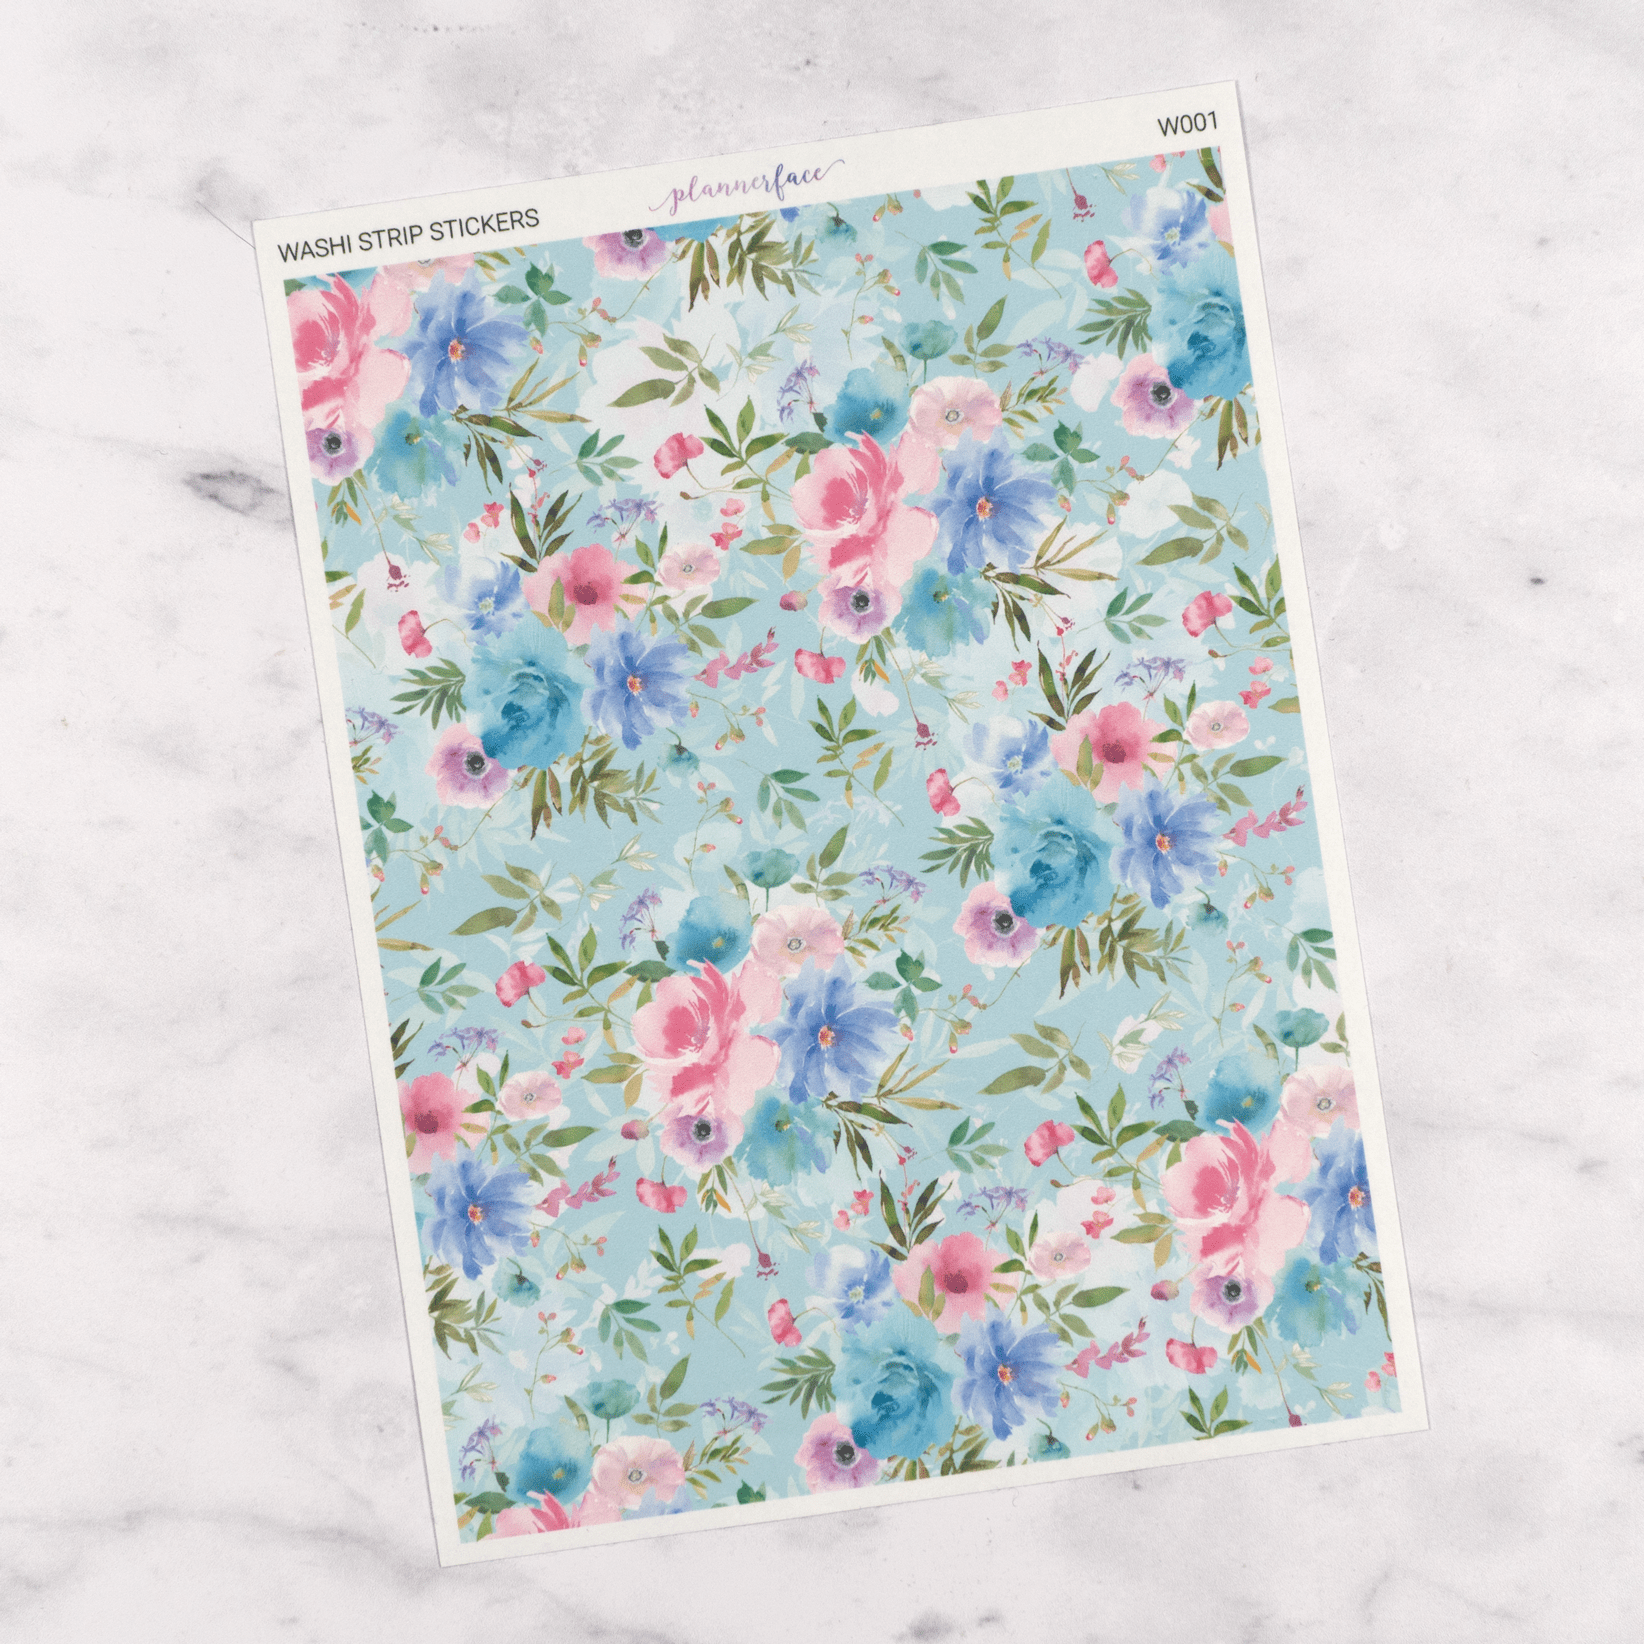 Mint & Pink Floral | Washi Tape Strips by Plannerface